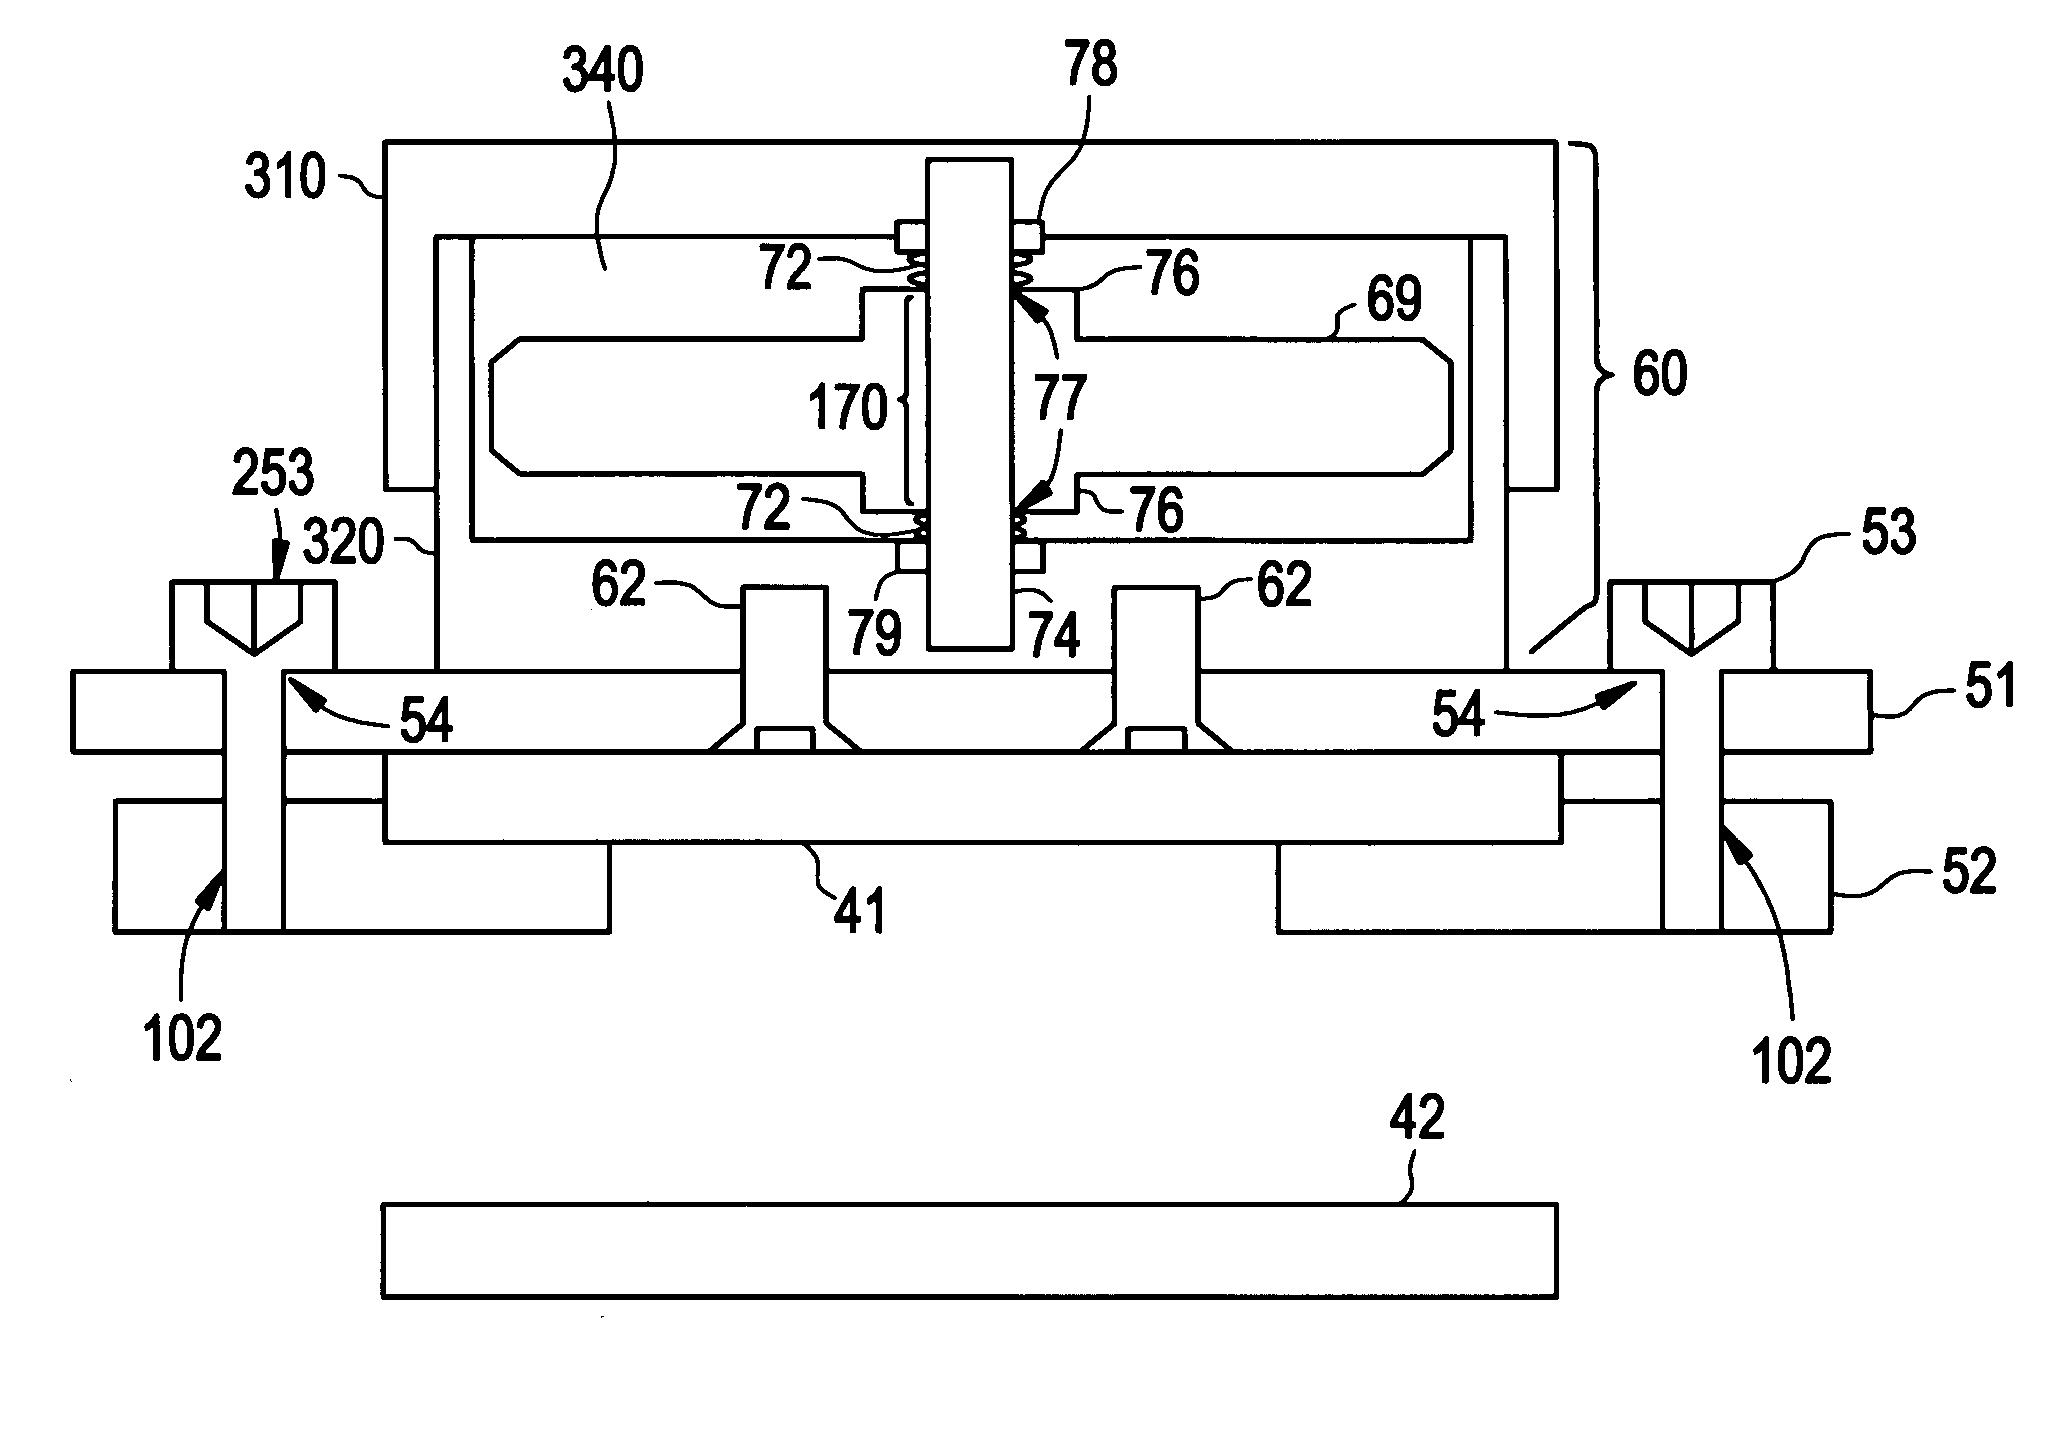 Method and apparatus for reducing vibration in component of a nuclear reactor